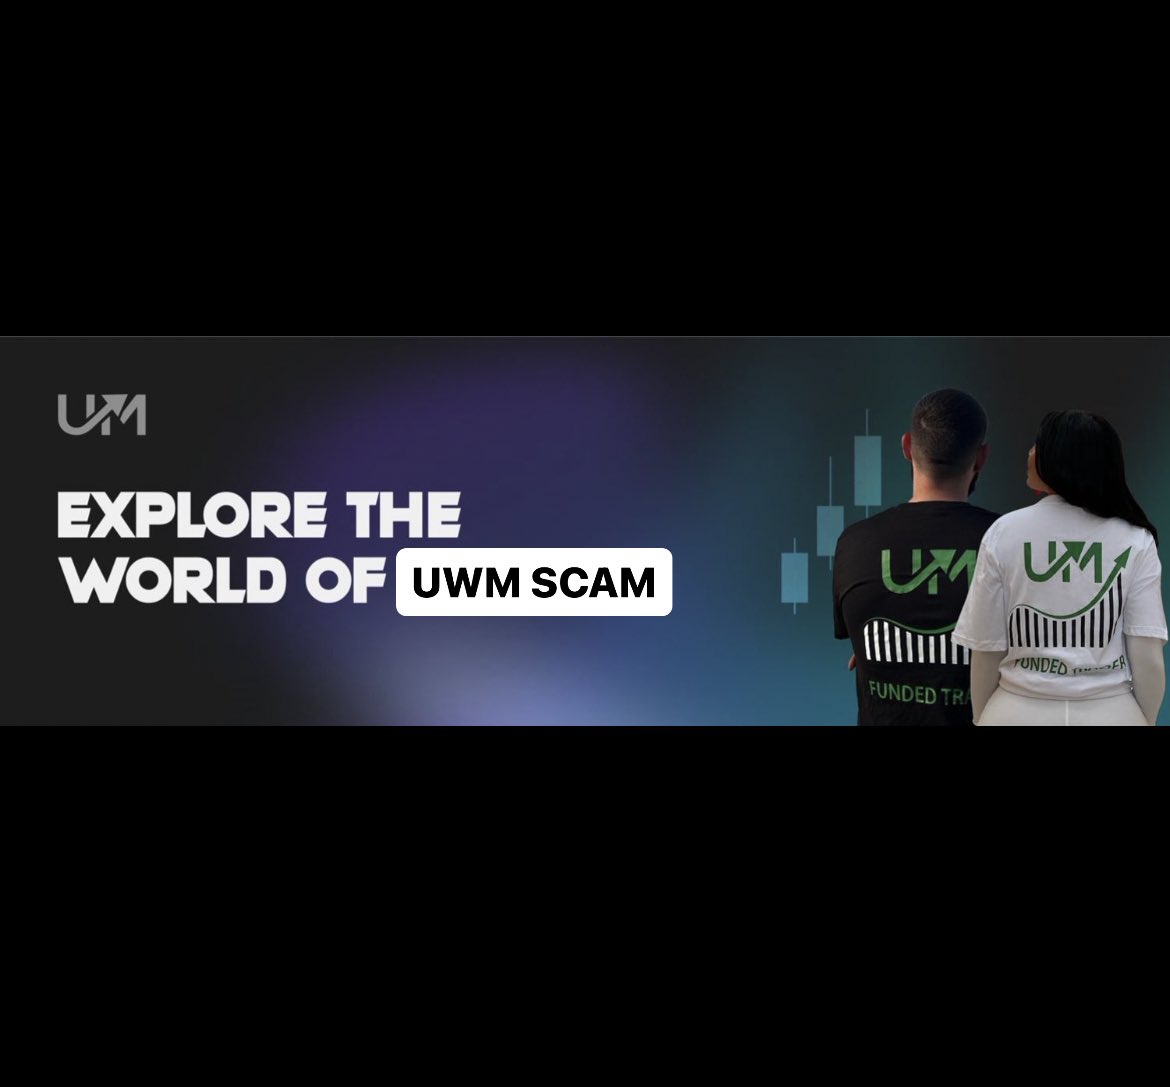 Scammer's get mad ASF when you don't let them scam prop traders 😂

EXPLORE THE WORLD OF UWM SCAM🤡 

@UWMTrading❌
UWMScamming✅
 
#propfirmbrigade📈